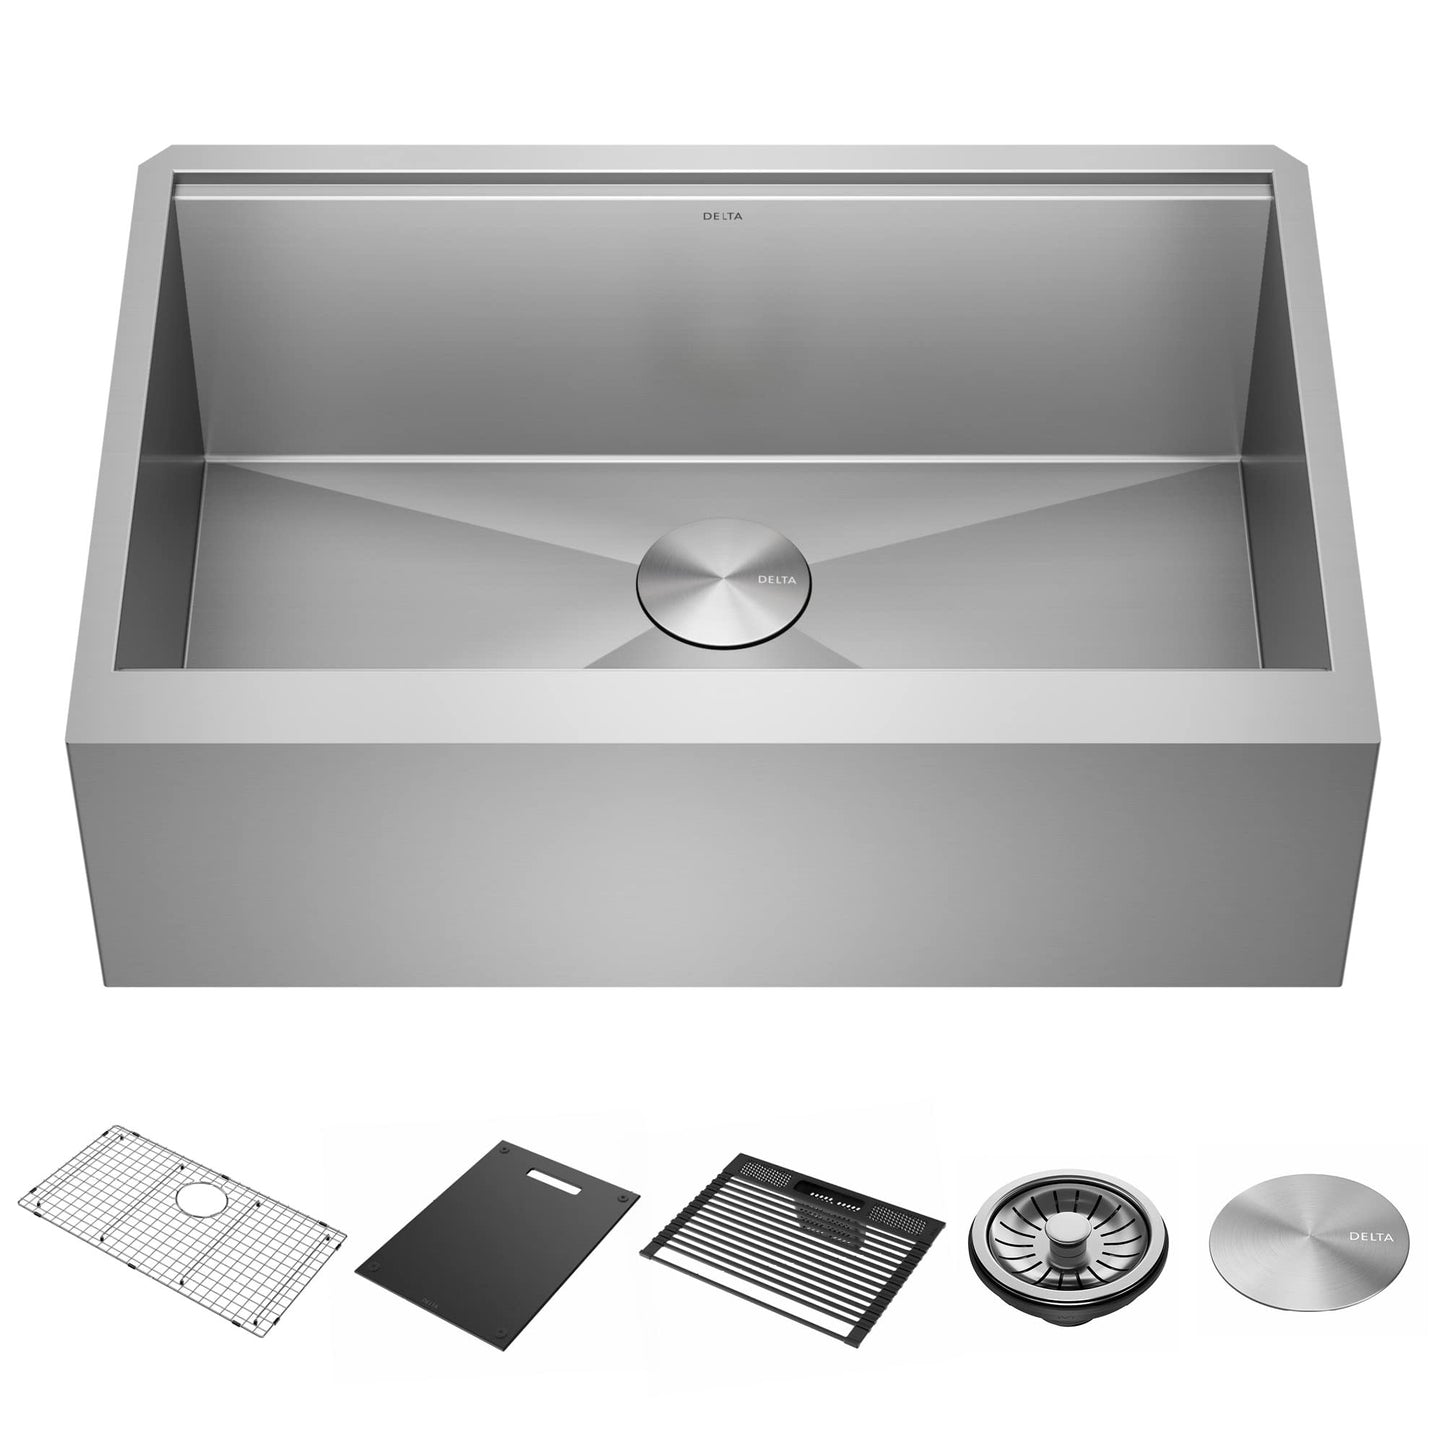 DELTA FAUCET Rivet 30-inch Workstation Farmhouse Apron Front Kitchen Sink Undermount 16 Gauge Stainless Steel Single Bowl with WorkFlow Ledge and Kit of 5 Accessories, 95C9031-30S-SS - Like New